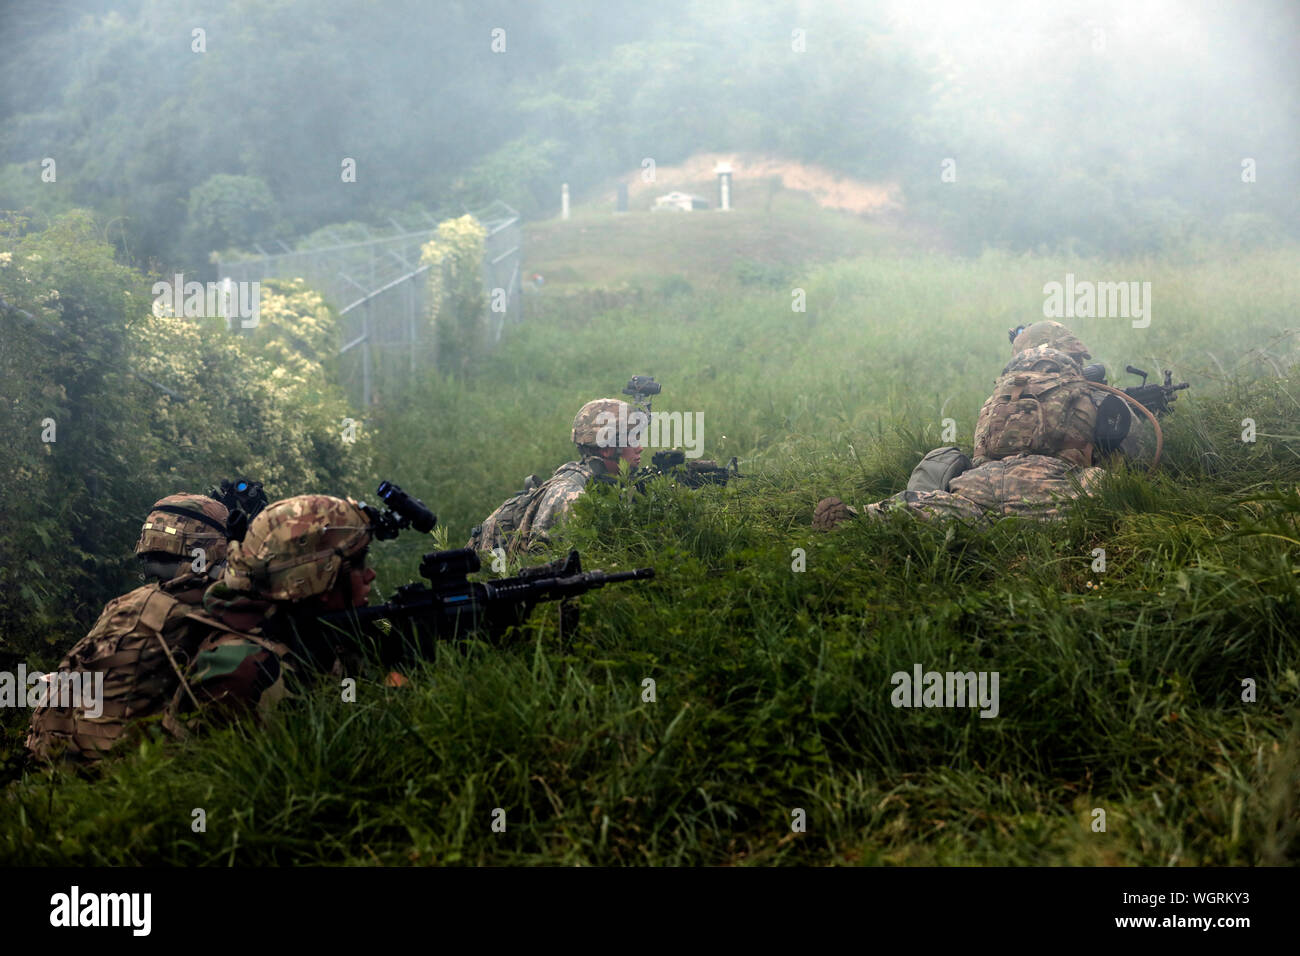 Soldiers with A Co., 2nd Battalion, 7th Cavalry Regiment, 3rd Armored Brigade Combat Team, 1st Cavalry Division prepare to assault an objective during platoon situational training exercises on August, 28. The Greywolf Brigade is on a nine-month rotation to the Republic of Korea in support of ROK allies and common defense of the peninsula. Stock Photo